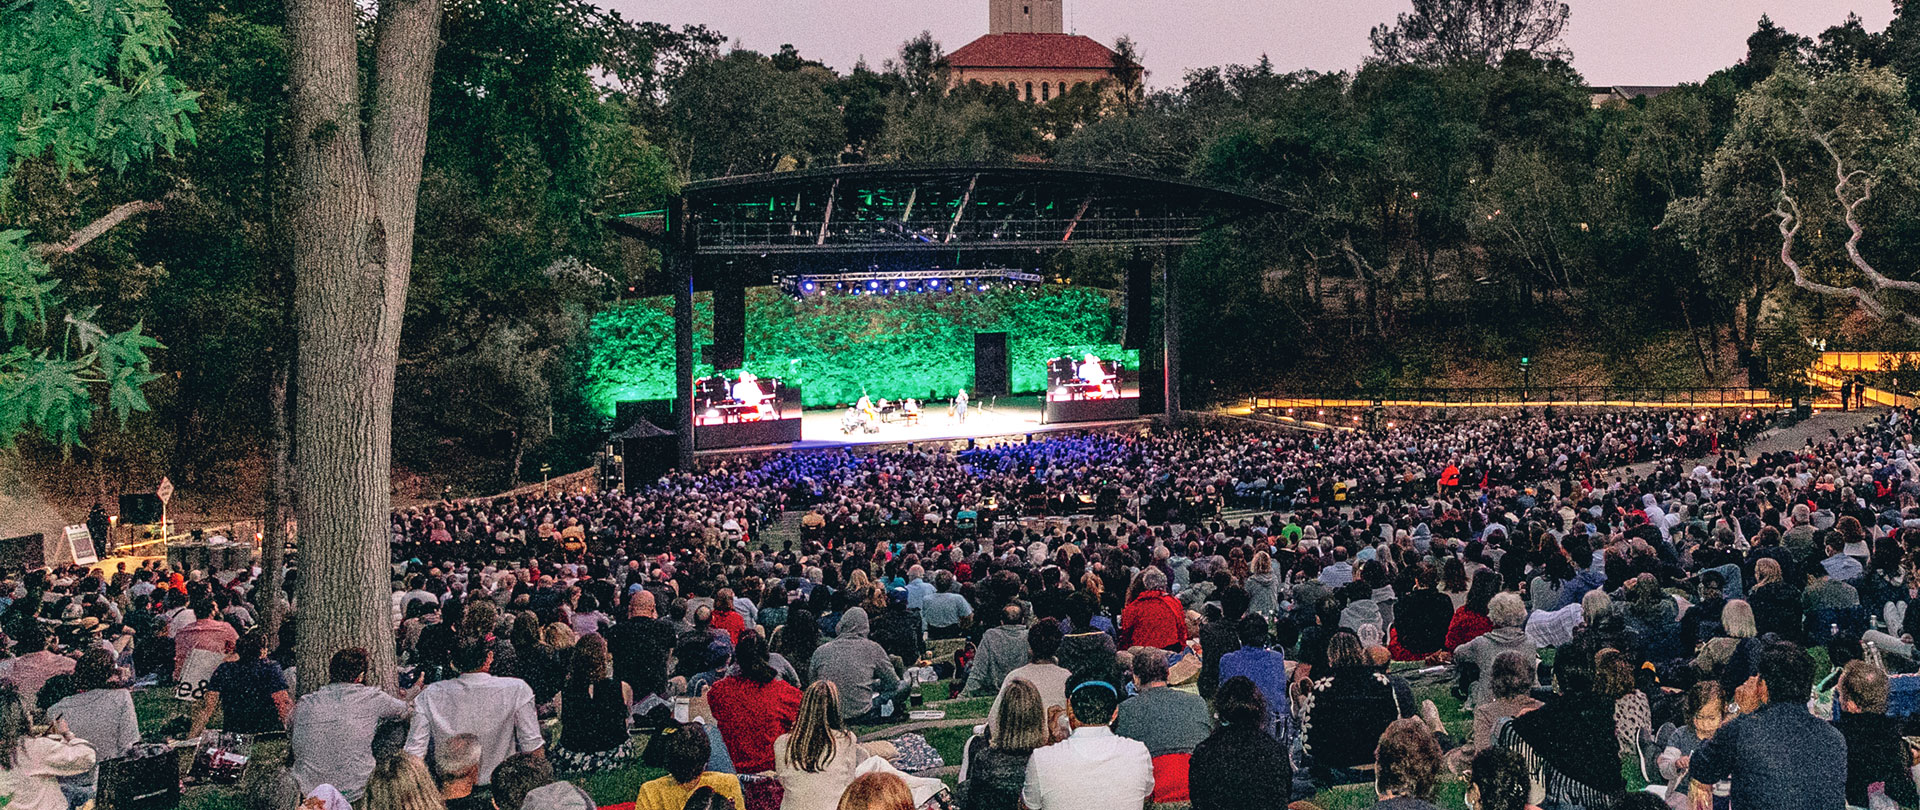 An image of Stanford's Frost Amphitheatre promoting SFJAZZ's upcoming series of LIVE performances at Stanford's Frost Amphitheatre